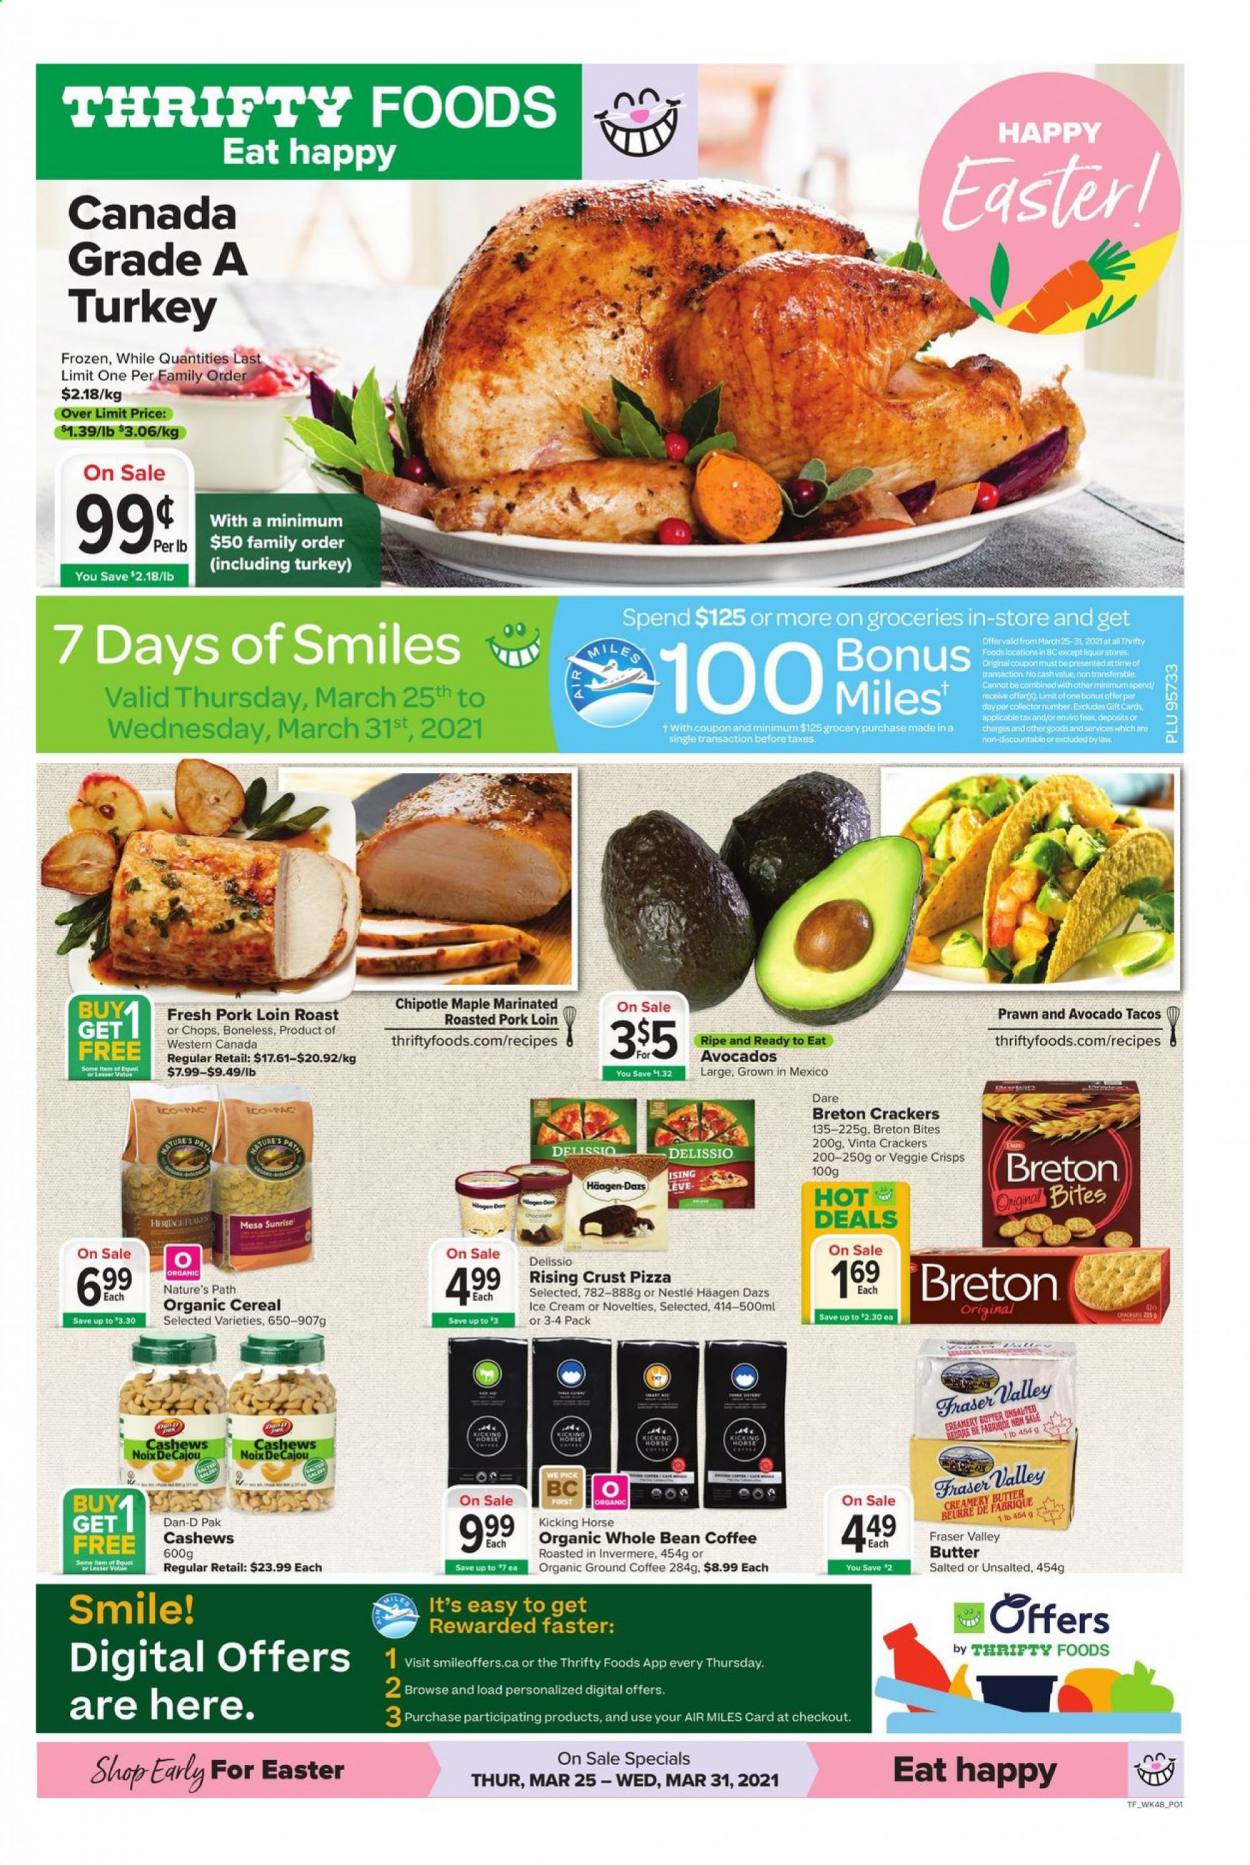 thumbnail - Thrifty Foods Flyer - March 25, 2021 - March 31, 2021 - Sales products - tacos, prawns, pizza, butter, ice cream, Häagen-Dazs, crackers, cereals, Dan-D Pak, cashews, coffee, ground coffee, pork loin, pork meat, Nestlé. Page 1.